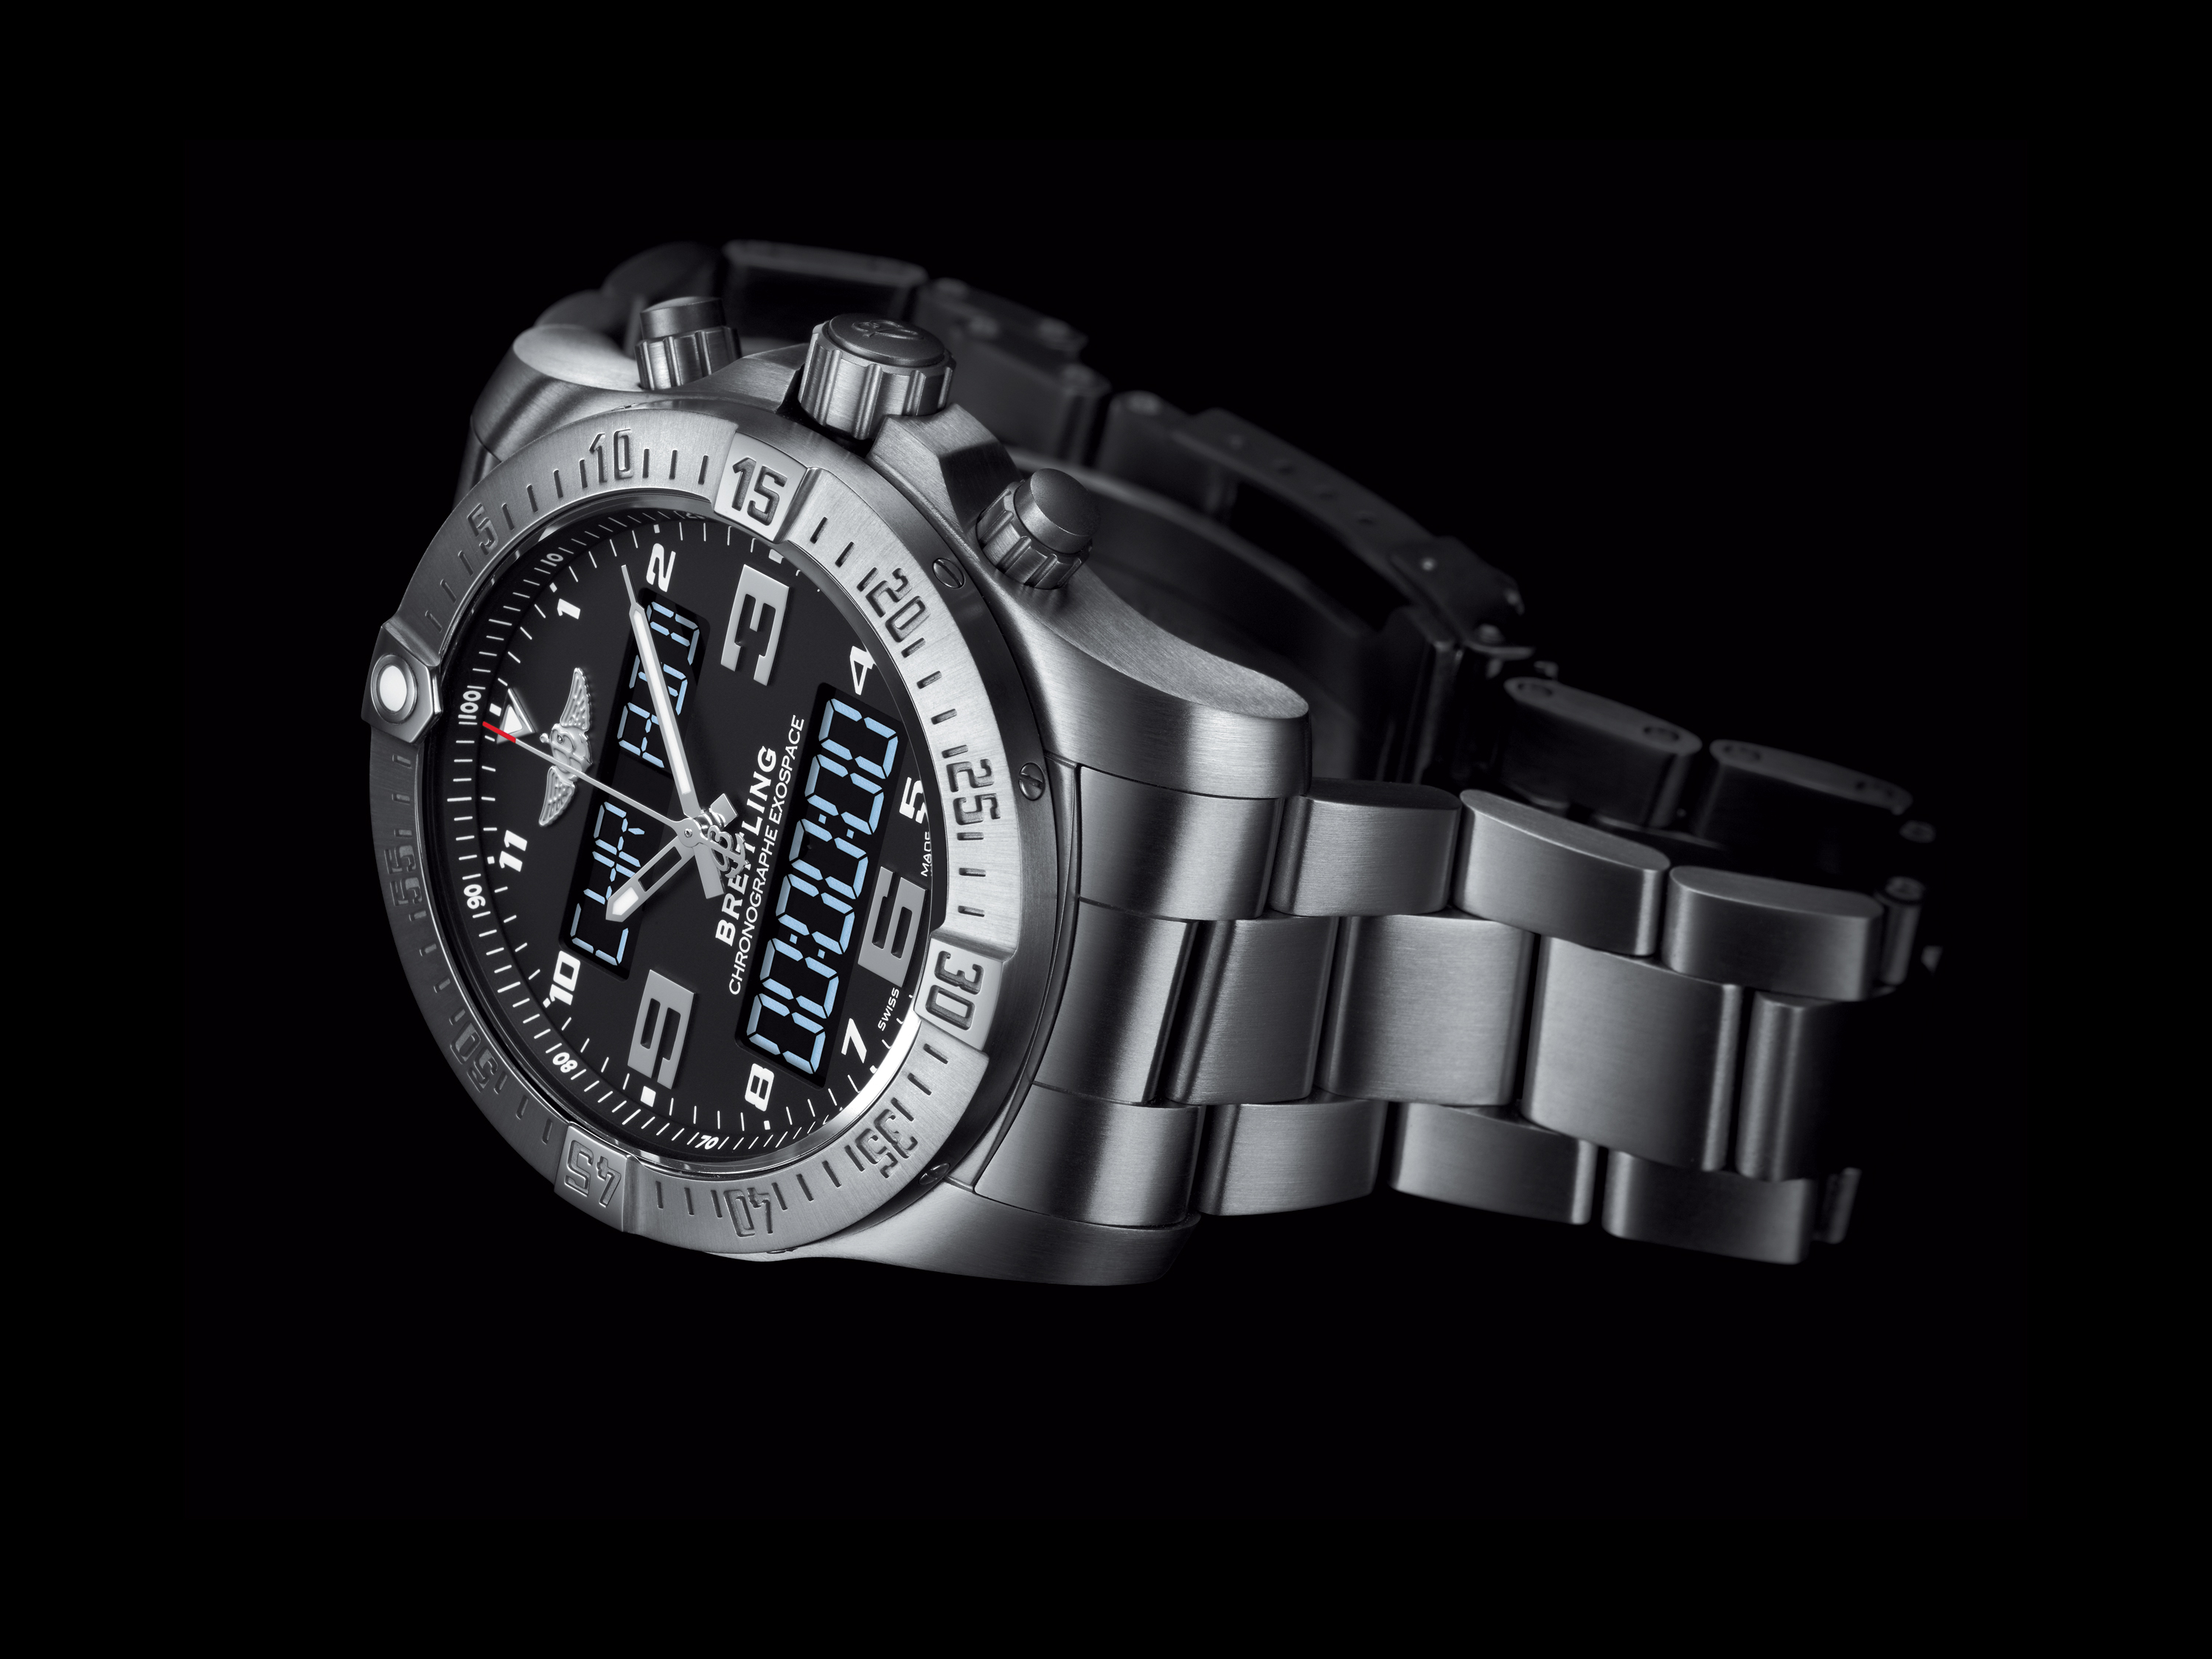 Breitlingenz Auto Watch Avengers II Seawolf Black Steel L.E. 75t Anifosario del Eyesito del Ayer / Air Force Certifi Timing, lim s #breitling超海洋遗产 II AB202012/BF74/256S/A20D.4